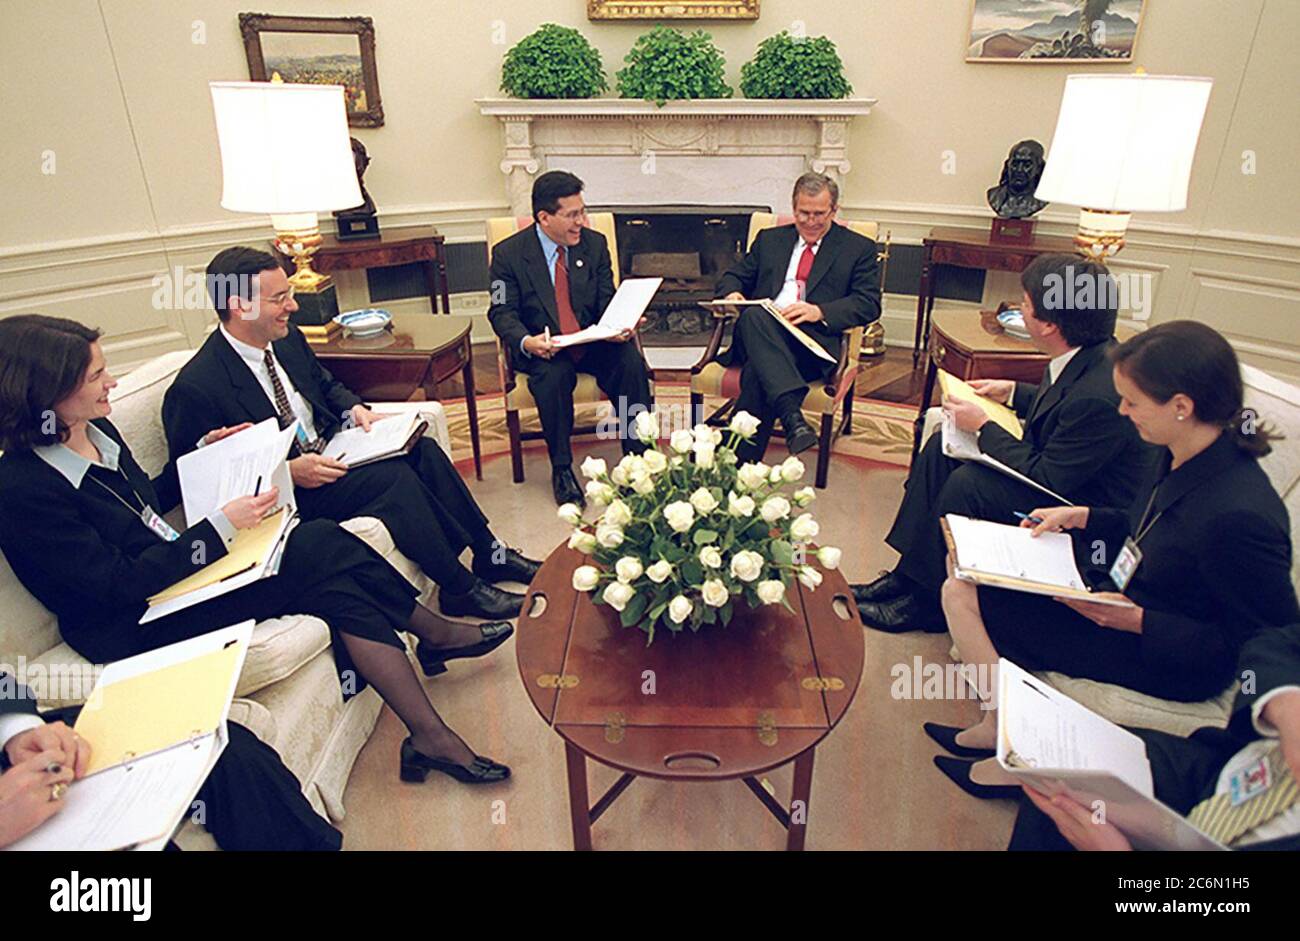 President George W. Bush meets with White House Counsel Alberto Gonzales and staff Feb. 28, 2001 for a judicial selection meeting in the Oval Office. Participants include, from left: Andy Card, Courtney Elwood, Brad Berenson, Brett Kavanaugh, Helgi Walker and Tim Flanigan.  Photo by Eric Draper, Courtesy of the George W. Bush Presidential Library Stock Photo